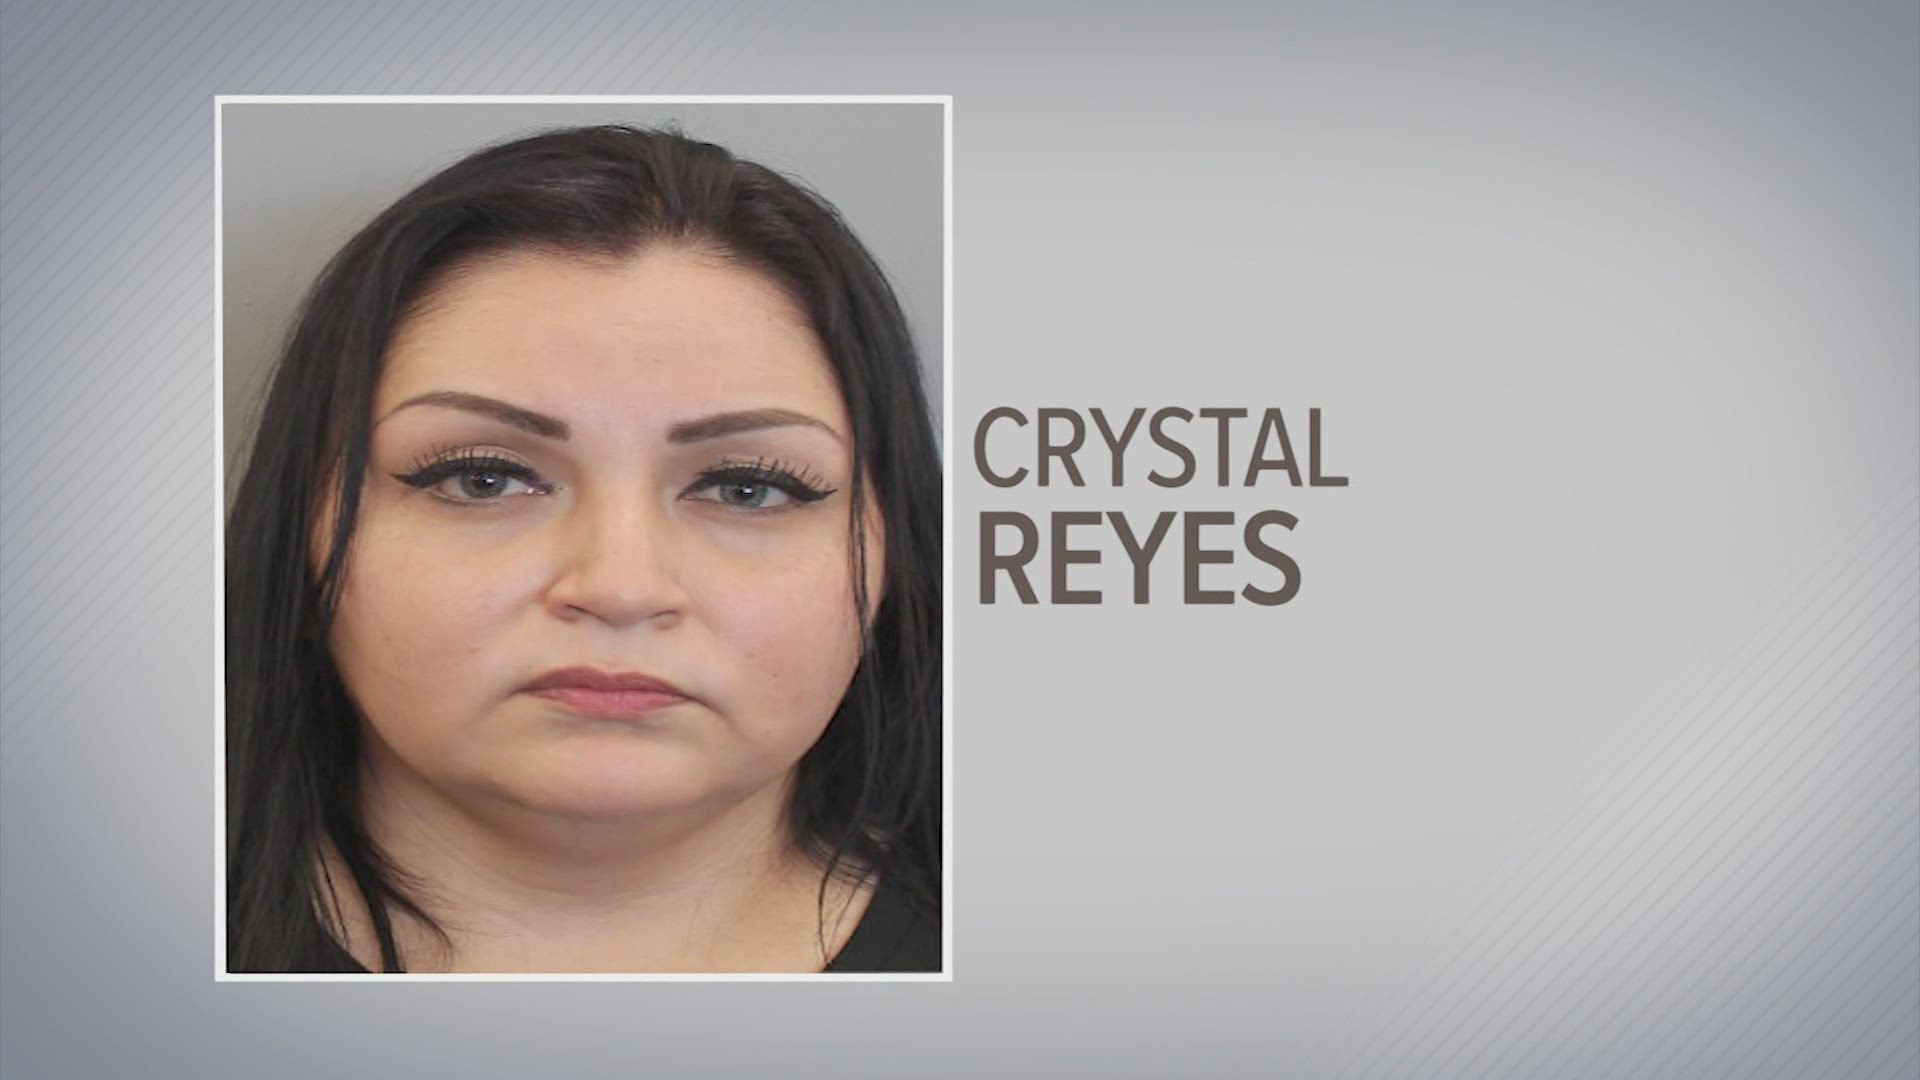 Houston police said Crystal Reyes was eventually pulled over after nearly crashing into an HPD patrol vehicle.